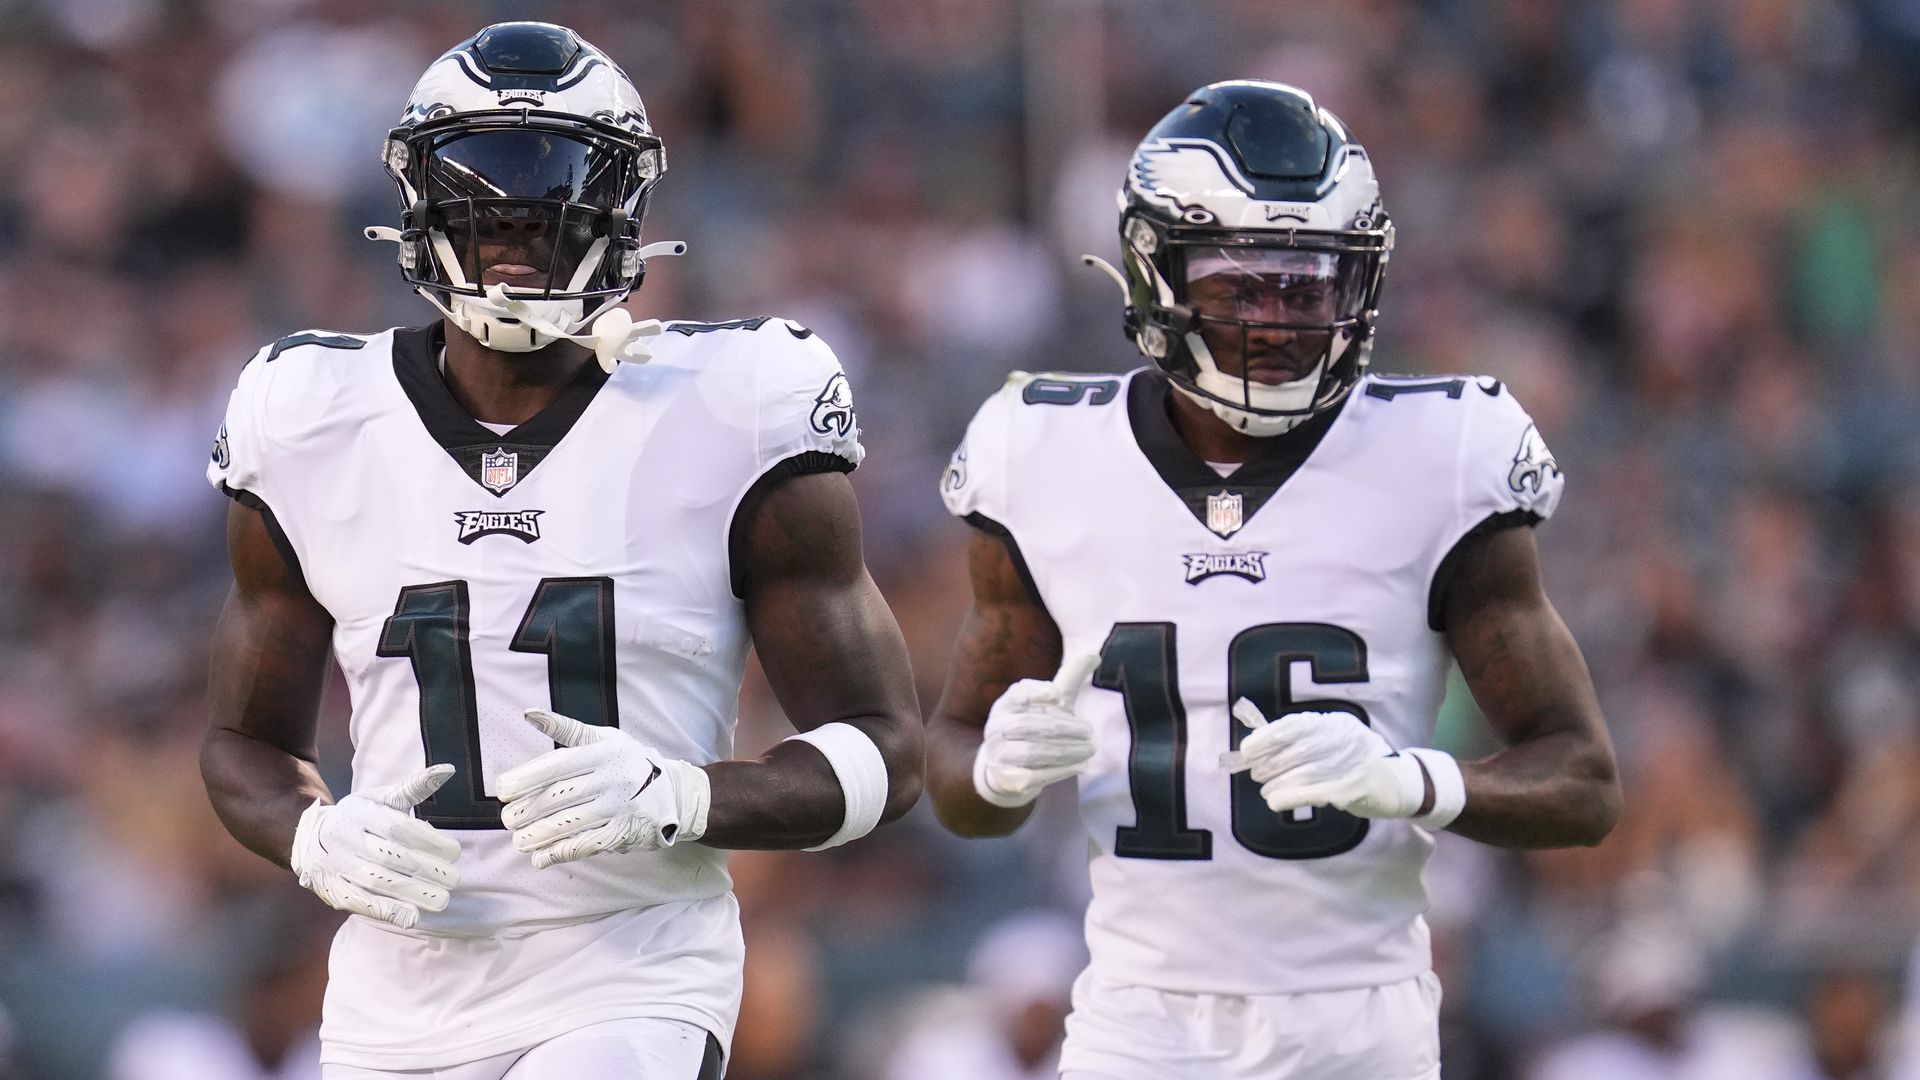 A.J. Brown #11 and Quez Watkins #16 of the Philadelphia Eagles in action against the New York Jets during the preseason game at Lincoln Financial Field on Aug. 12 in Philadelphia.